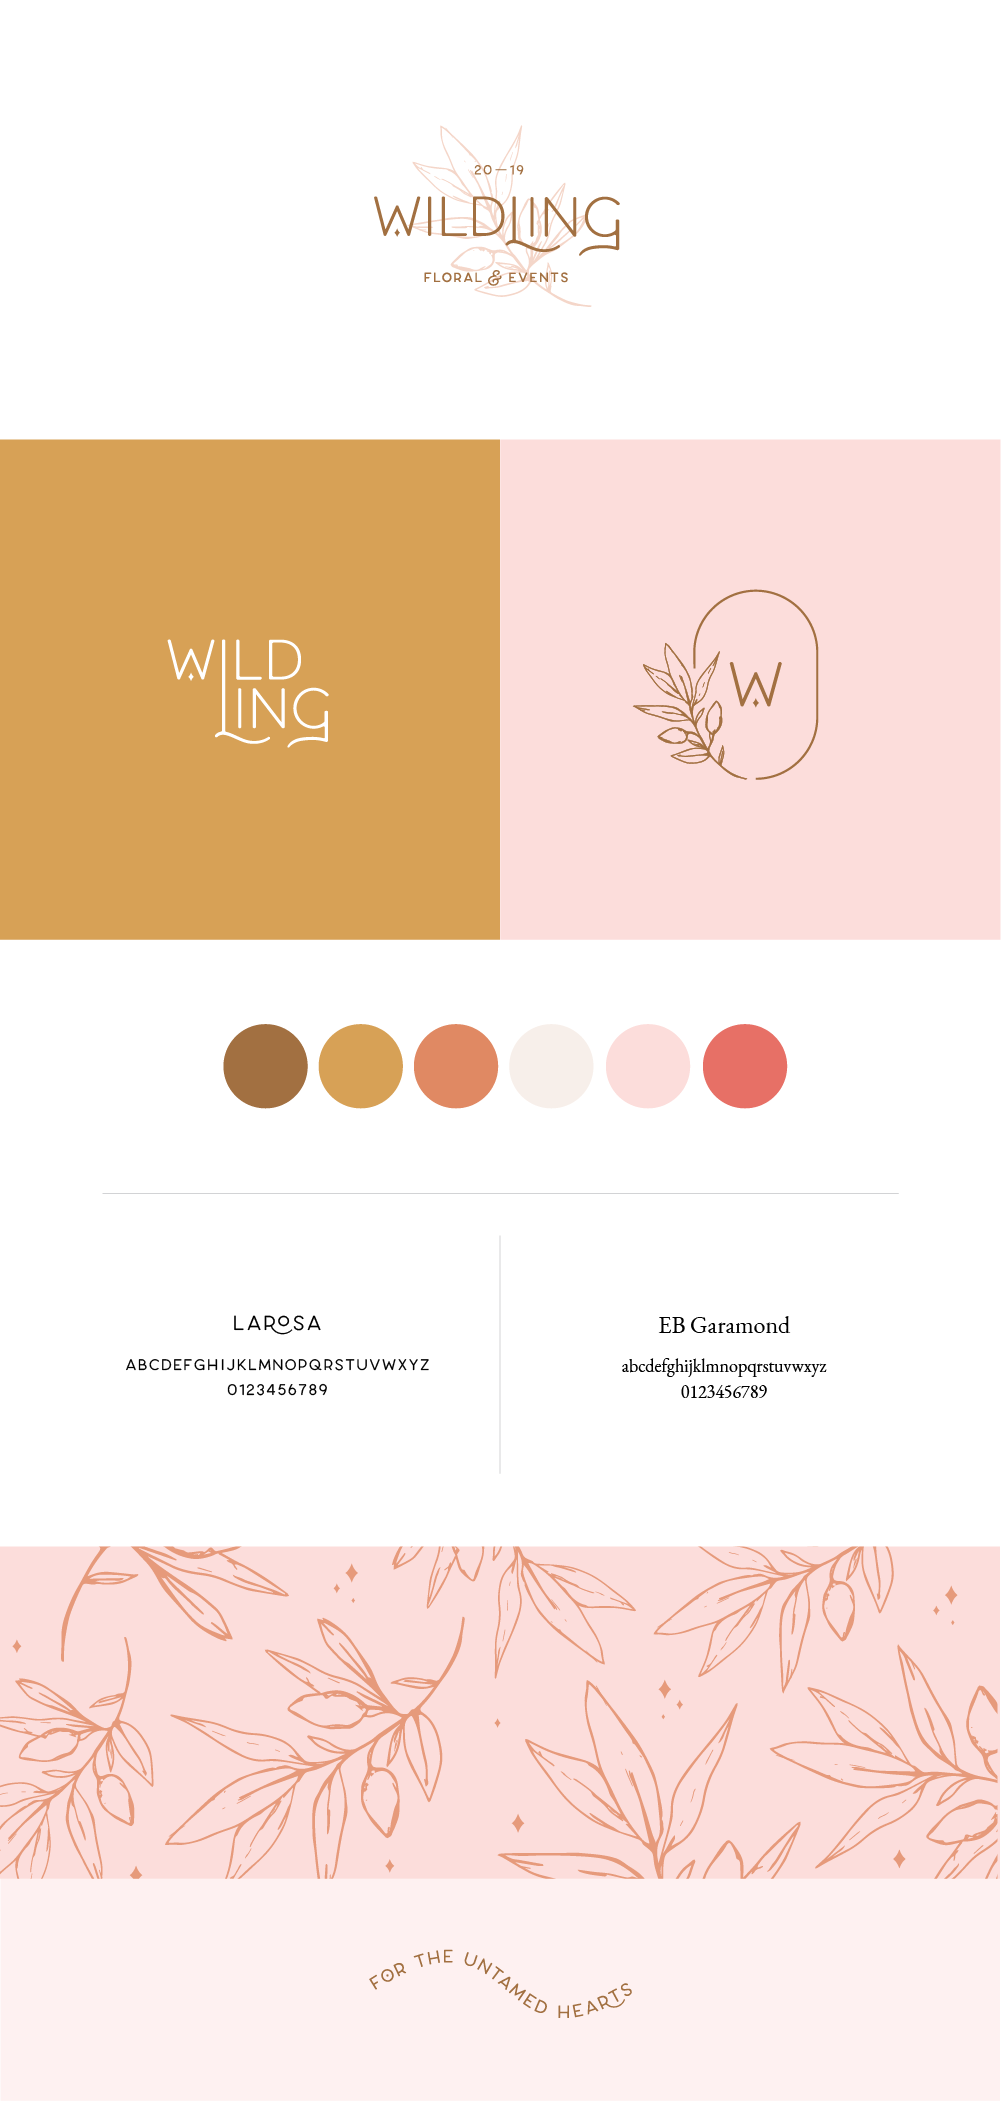 Brand Identity for Wildling 'Floral & Events'